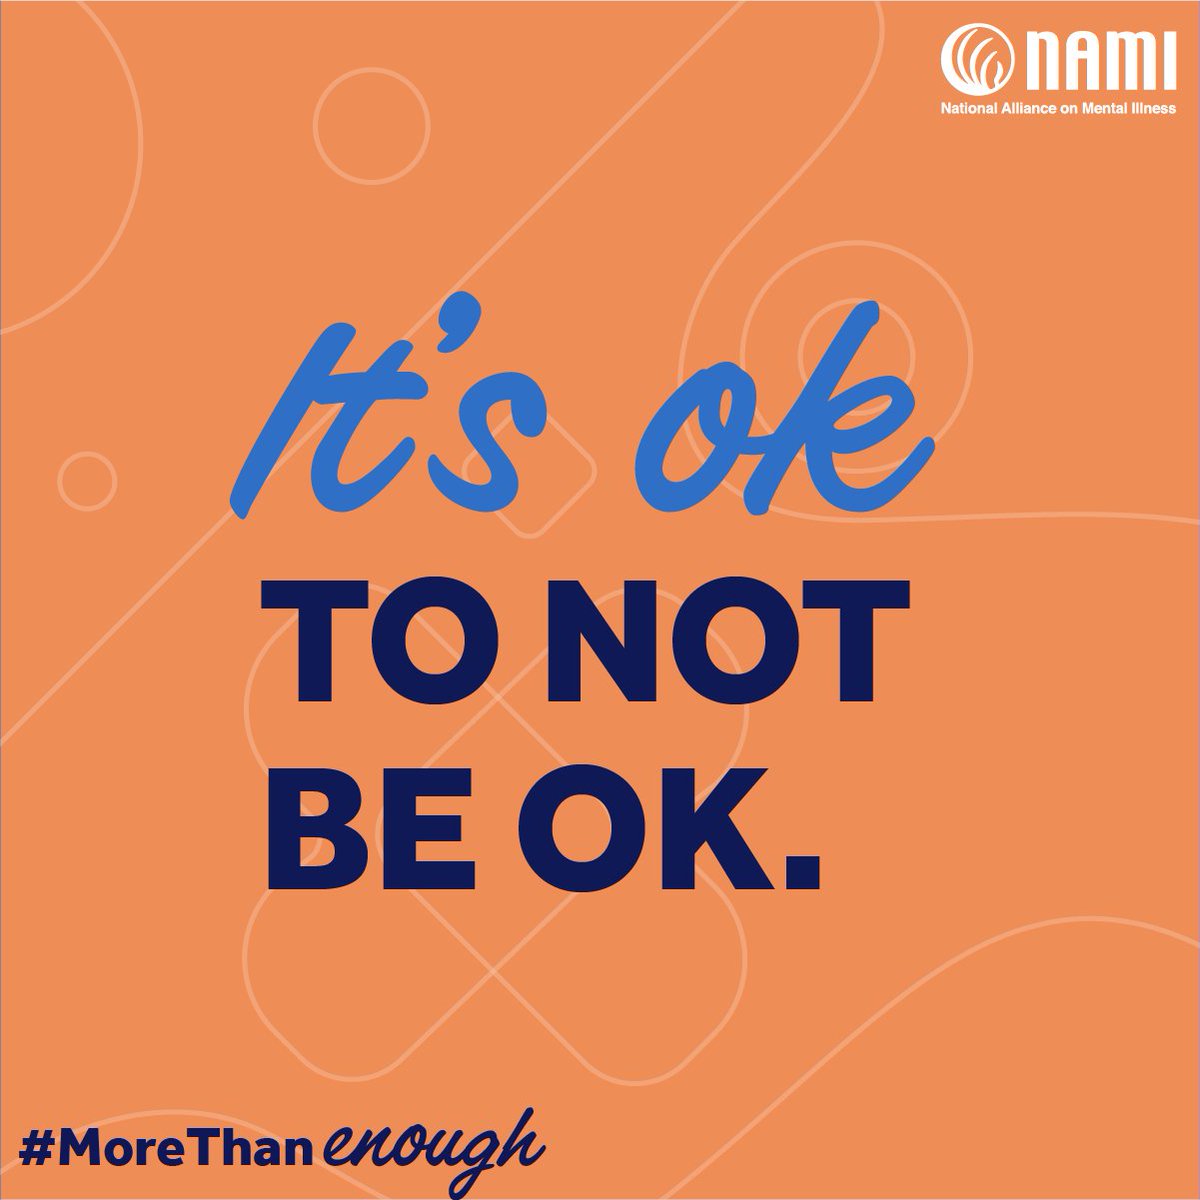 In honor of Mental Health Month, we alongside with @NAMICommunicate would like to remind each and everyone out there that it’s ok, to not be ok. And there is always hope. Talking with someone about your thoughts and feelings can save your life.